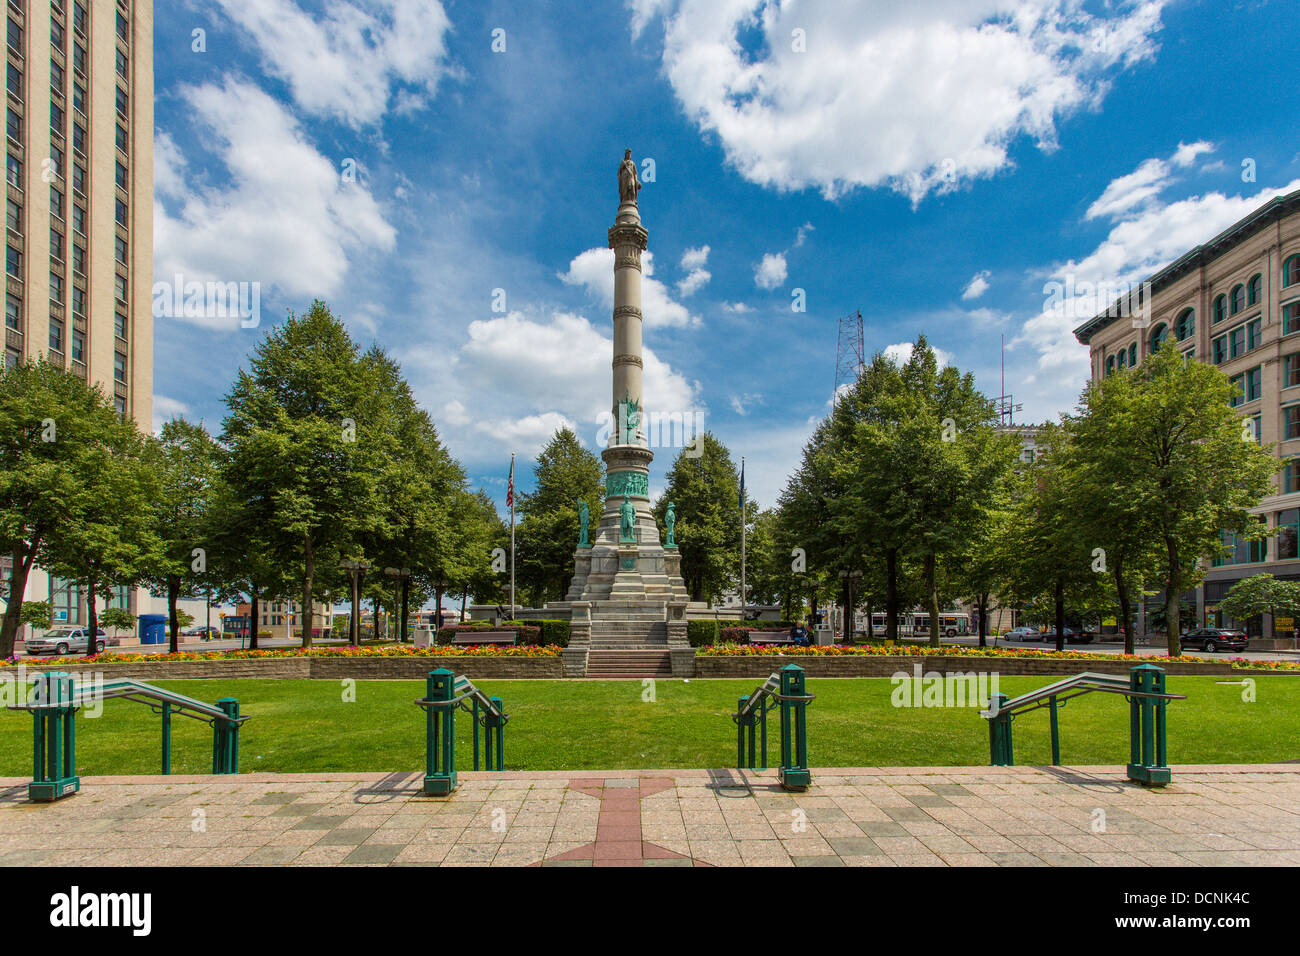 Civil War monument, titled Soldiers and Sailors in Lafayette Square in the city of Buffalo New York United States Stock Photo